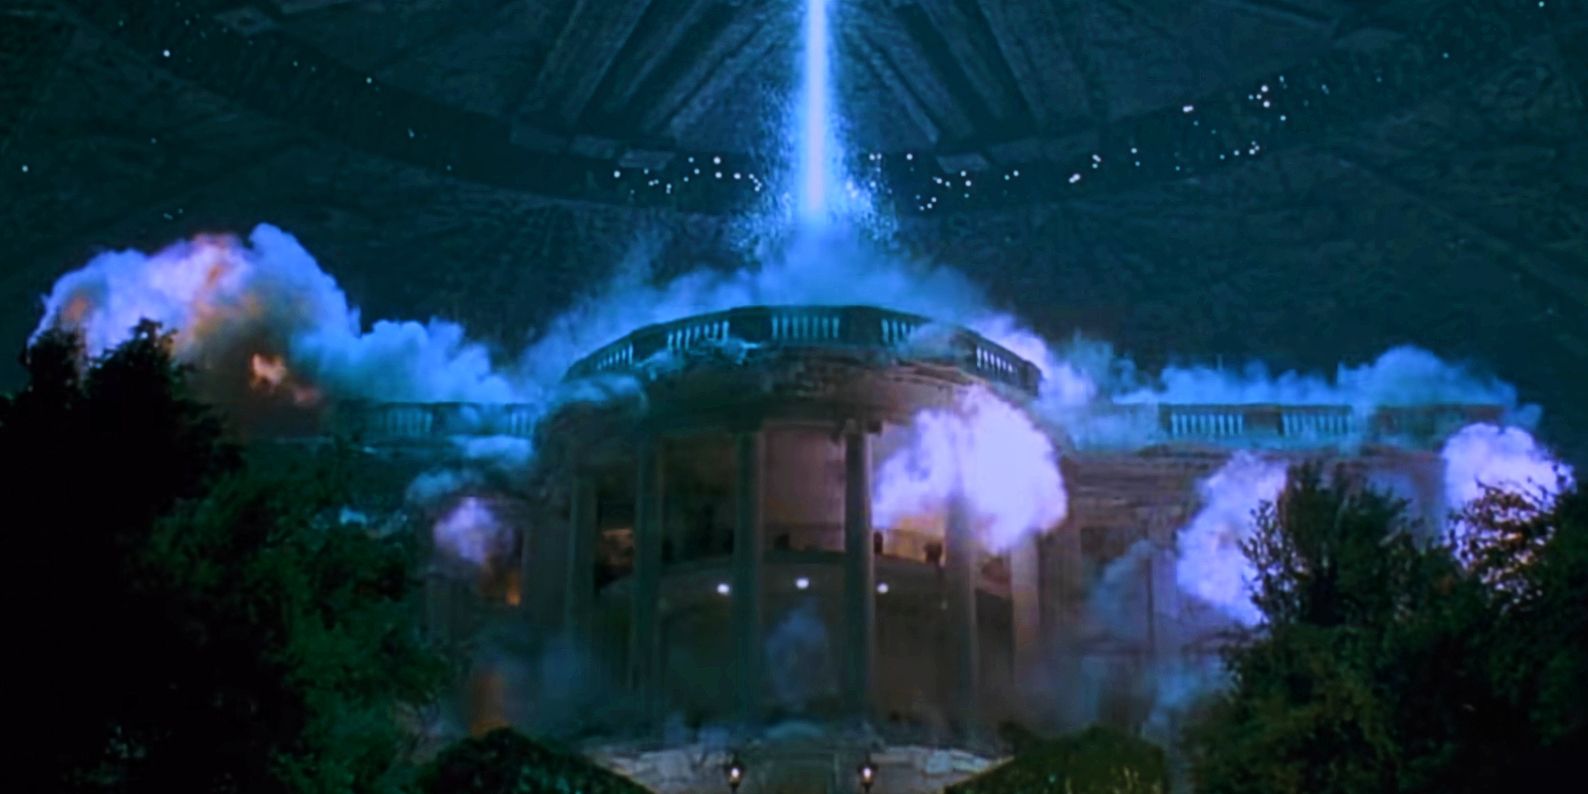 The White House gets destroyed in Independence Day